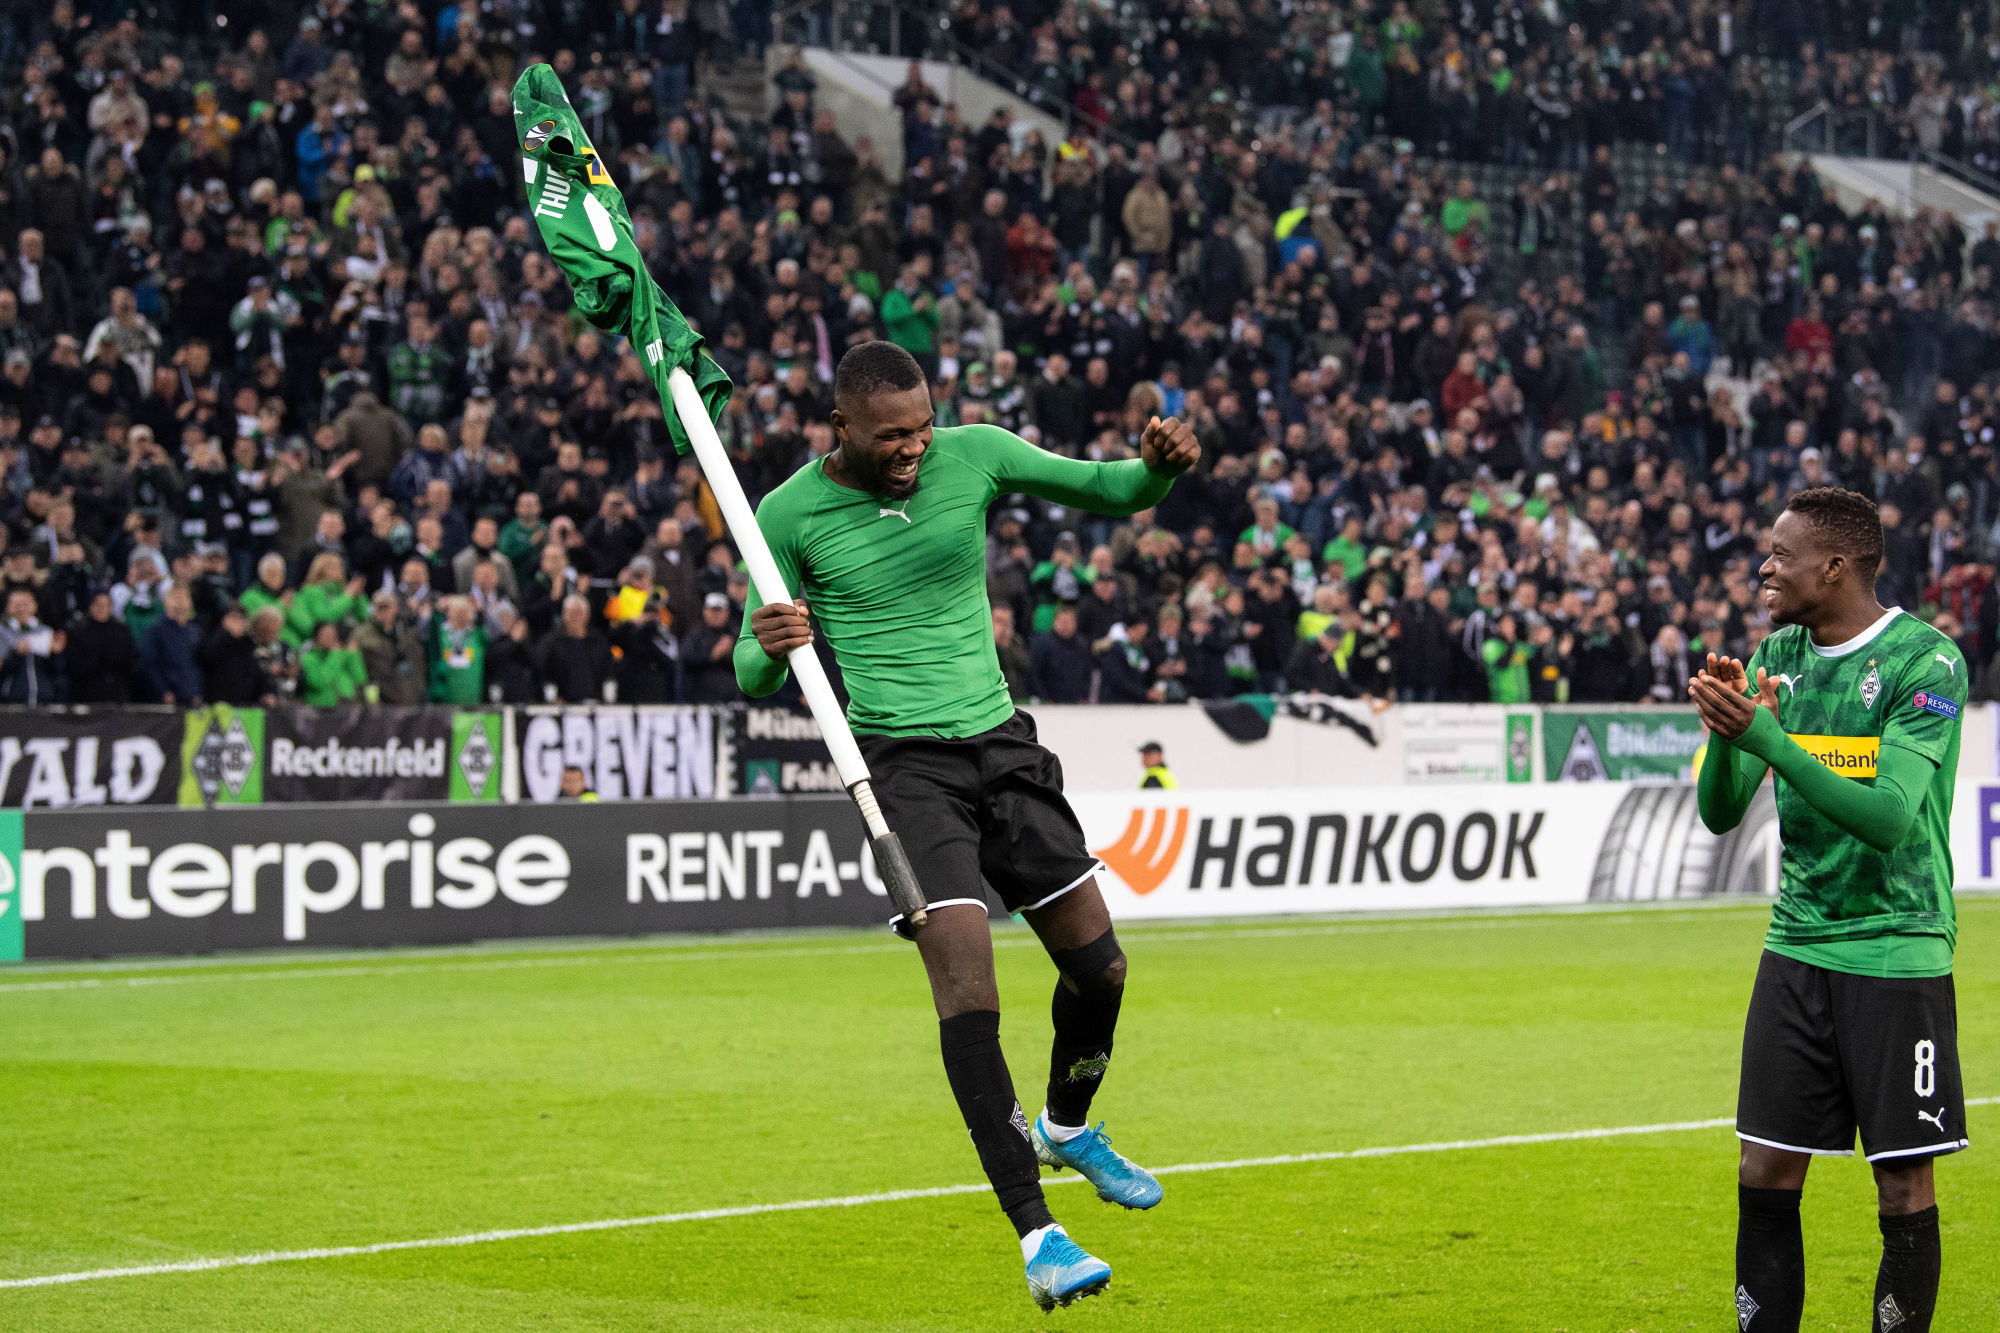 07 November 2019, North Rhine-Westphalia, Mˆnchengladbach: Soccer: Europa League, Borussia Mˆnchengladbach - AS Rome, Group stage, Group J, 4th matchday in Borussia-Park. Gladbach's Marcus Thuram (l) and Denis Zakaria celebrate their 2-1 home win over AS Rome. Photo: Federico Gambarini/dpa 

Photo by Icon Sport - Marcus THURAM - Denis ZAKARIA - Borussia-Park - Monchengladbach (Allemagne)